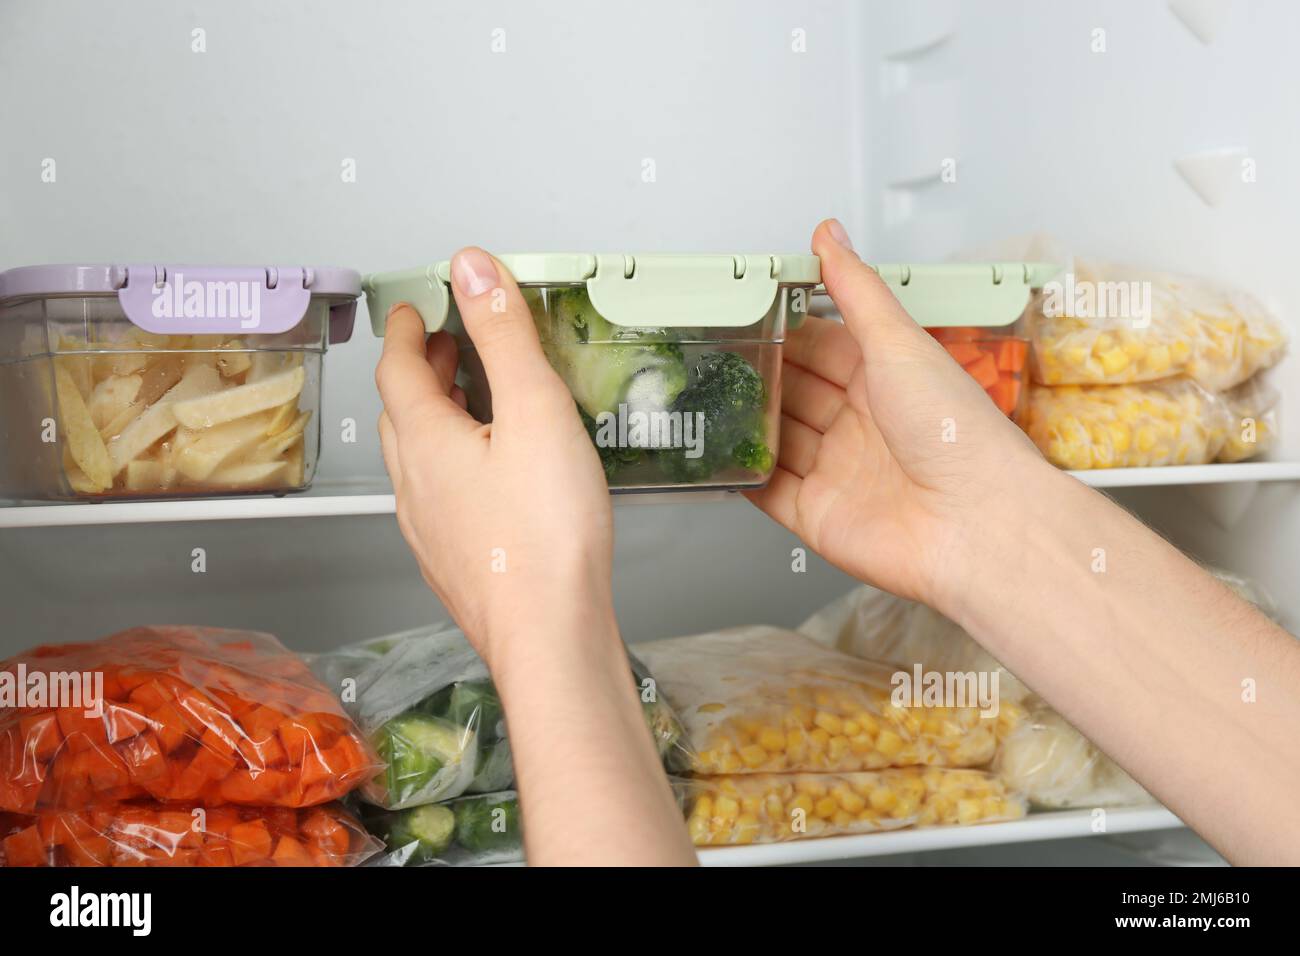 https://c8.alamy.com/comp/2MJ6B10/woman-putting-container-with-broccoli-in-refrigerator-with-frozen-vegetables-closeup-2MJ6B10.jpg